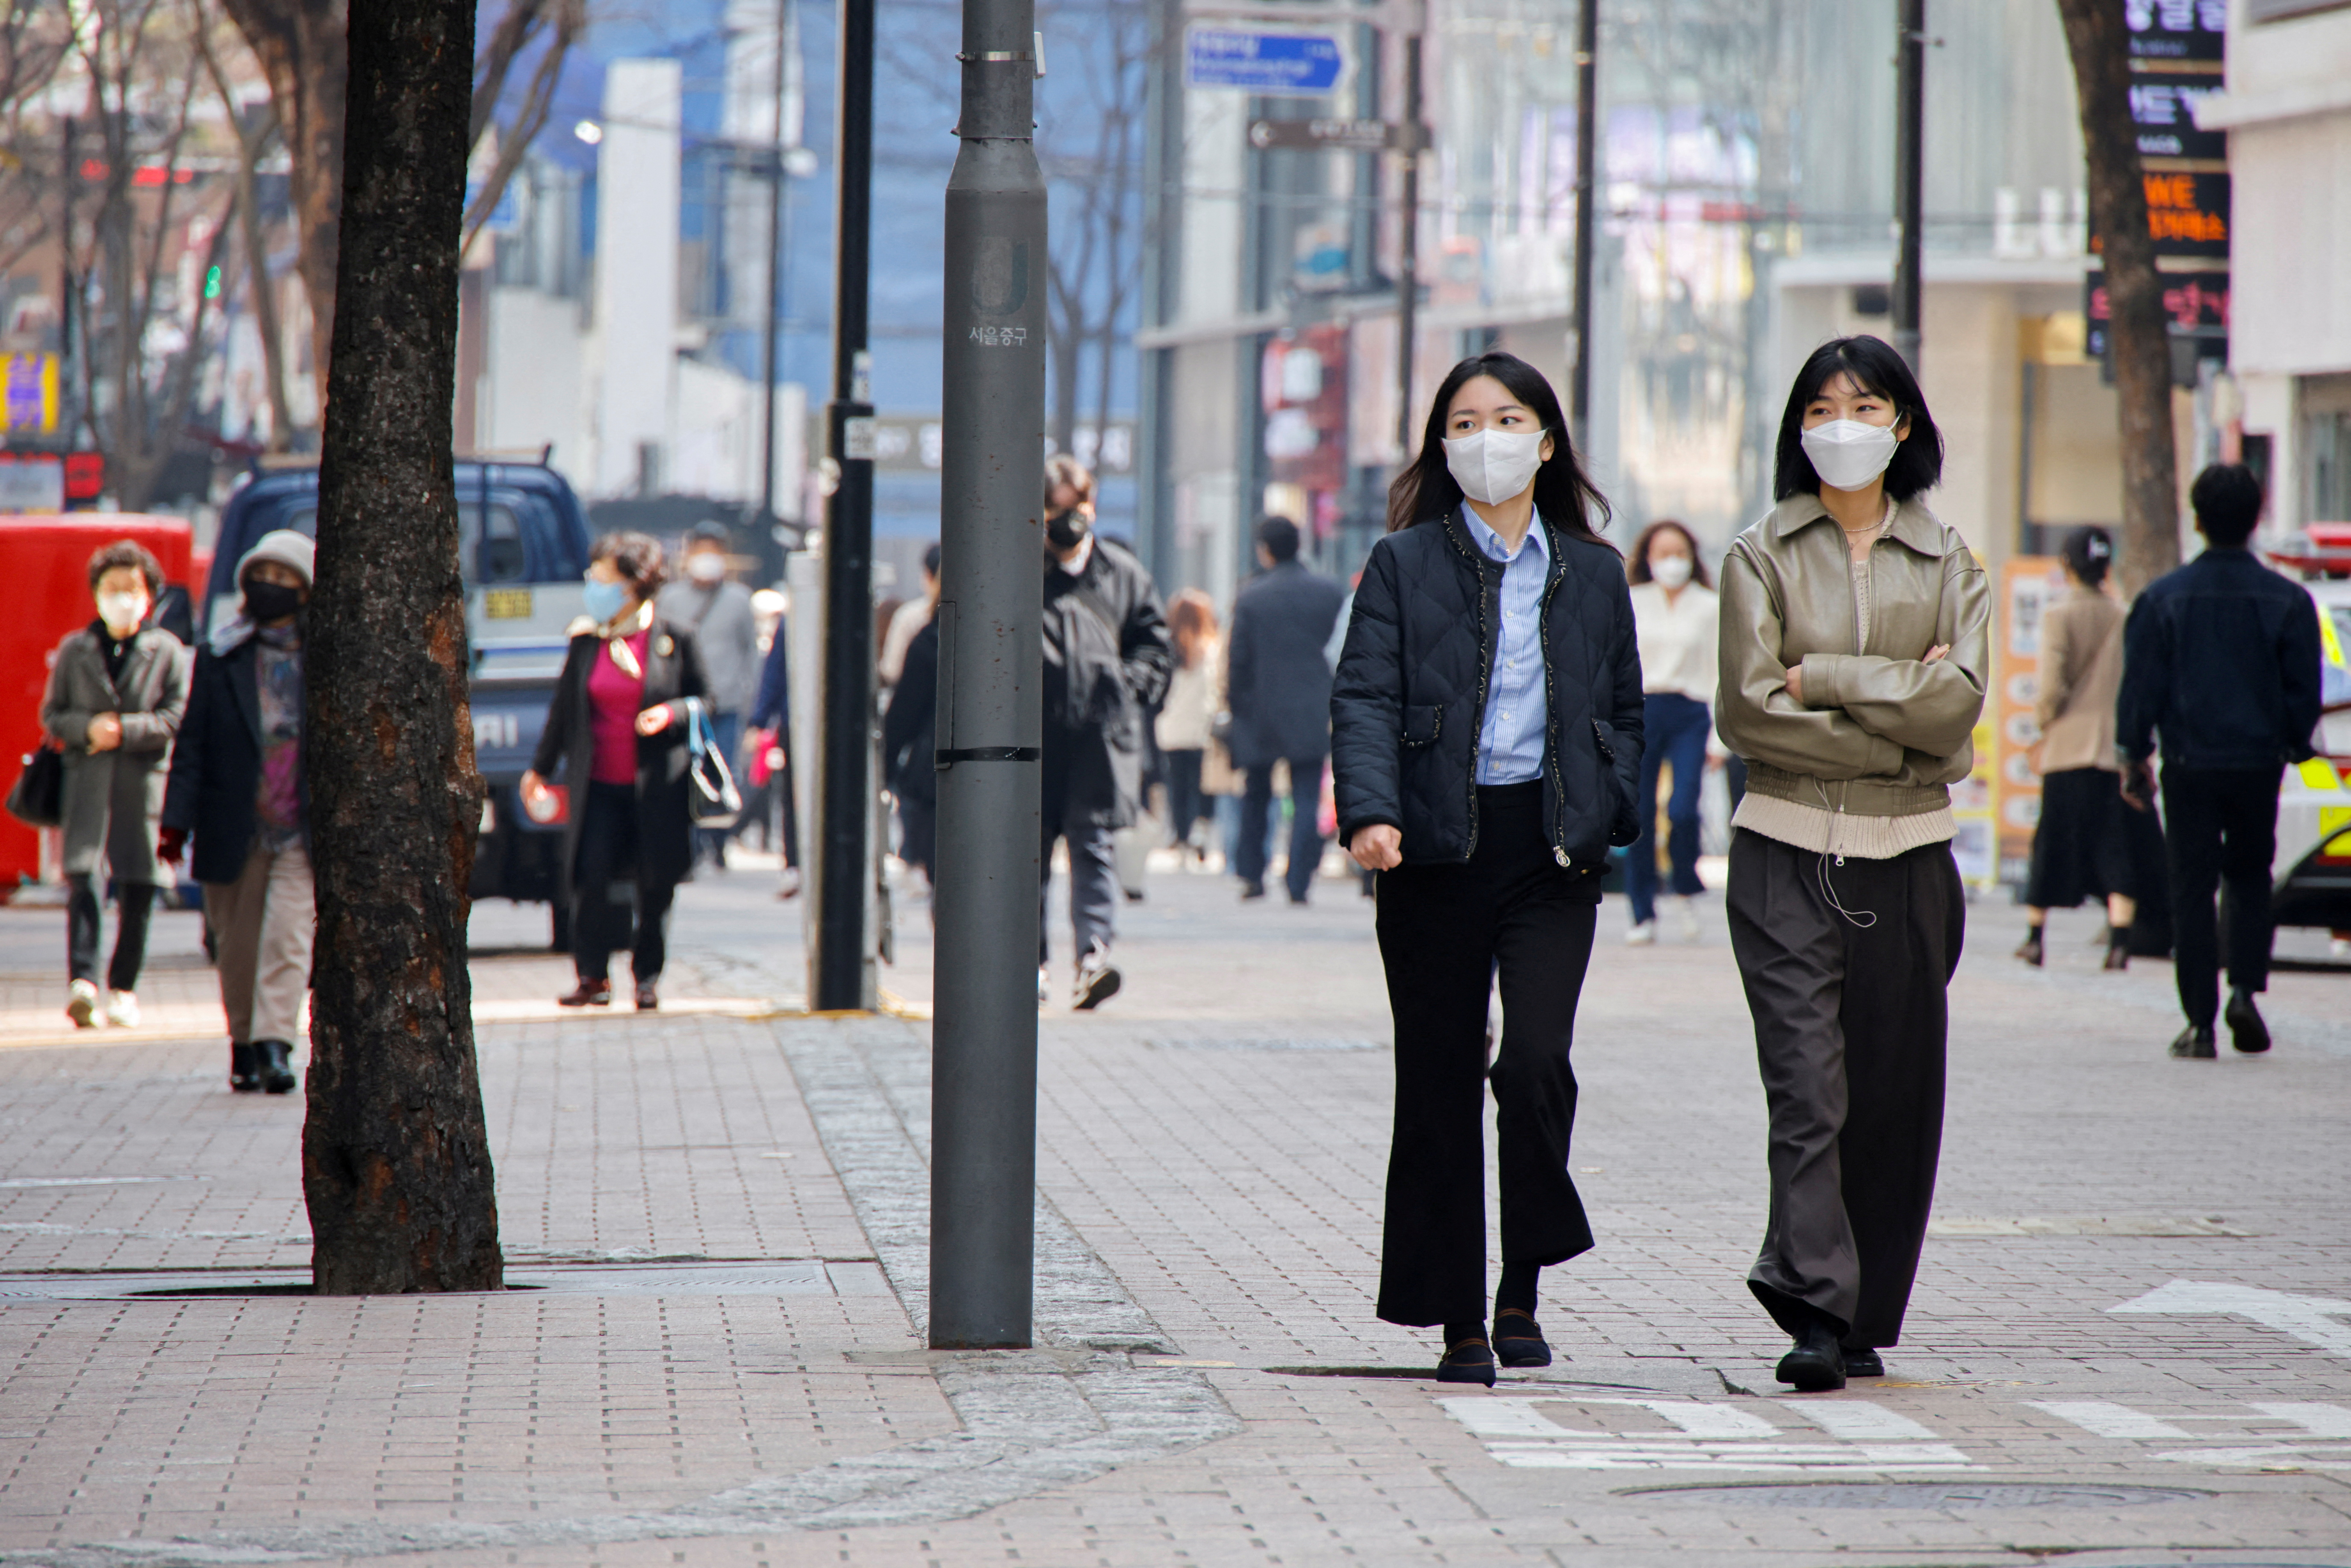 S.Korea likely to lift outdoor mask mandate, most COVID curbs this